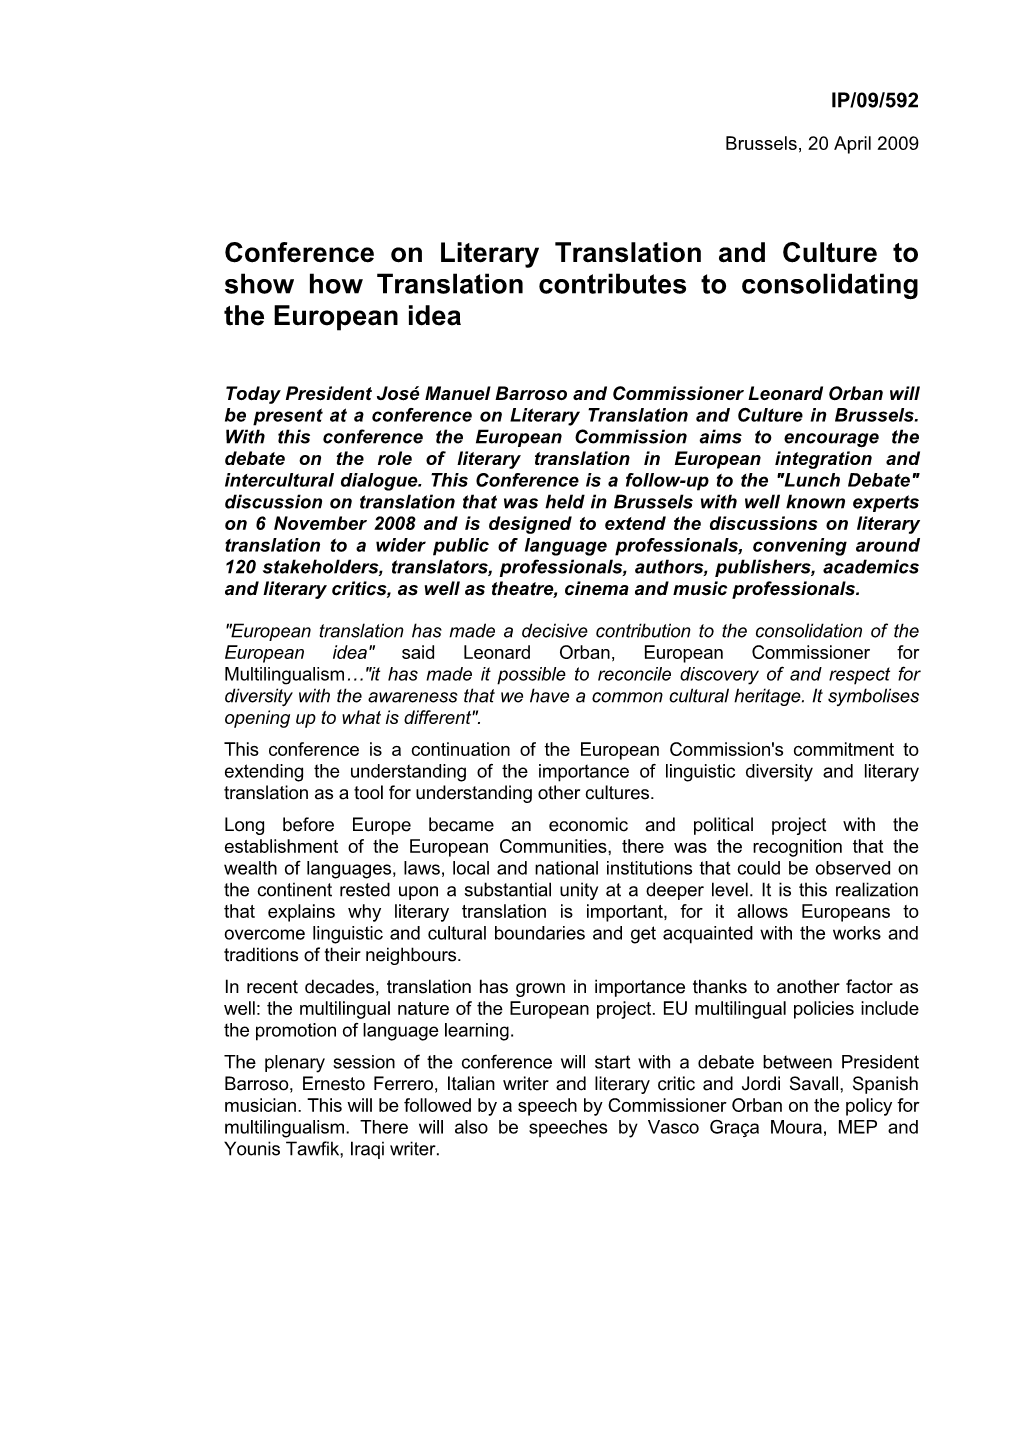 Conference on Literary Translation and Culture to Show How Translation Contributes to Consolidating the European Idea